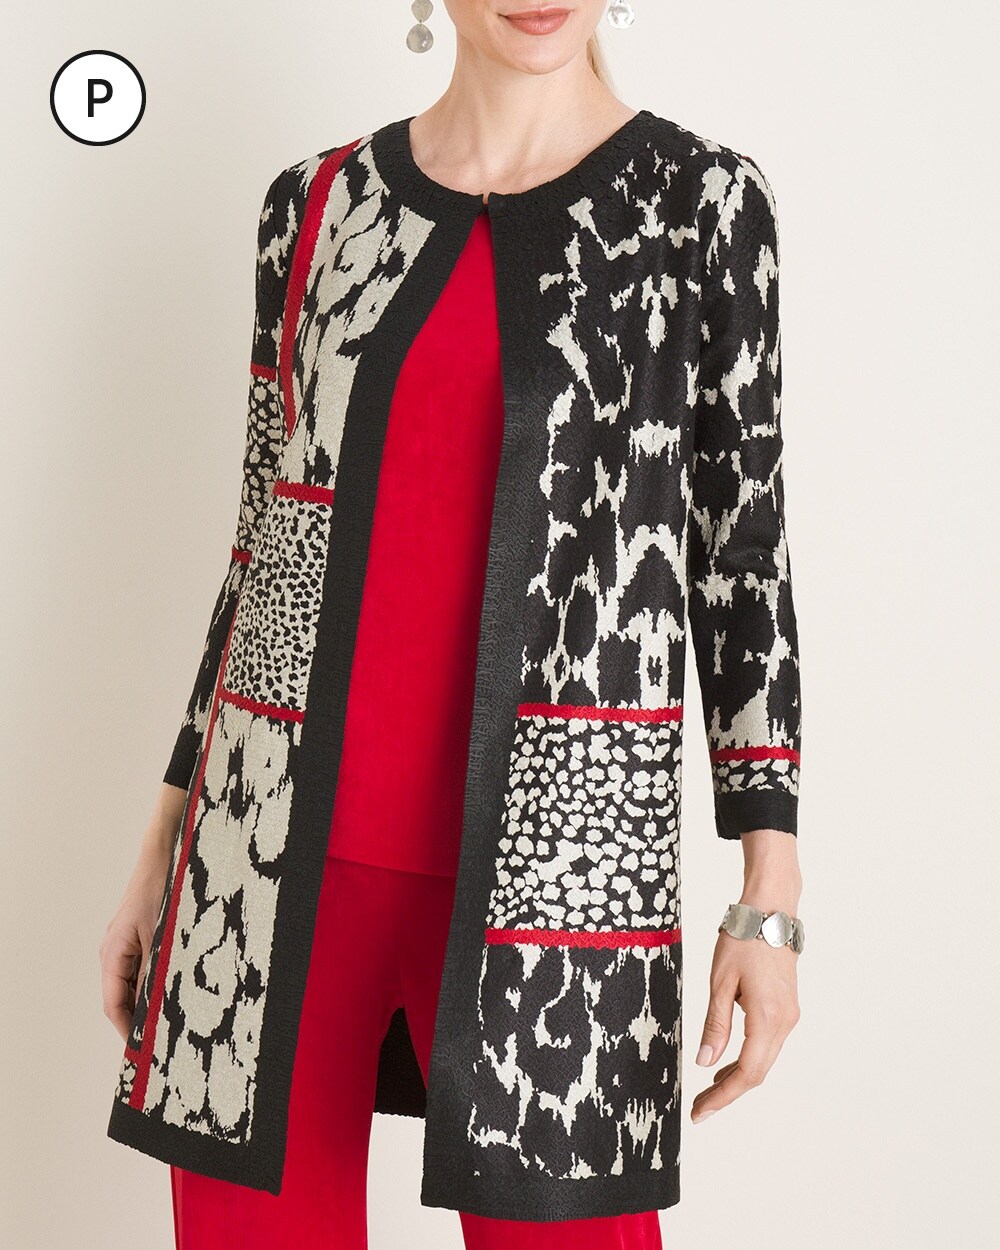 Travelers Collection Petite Crushed Patchwork Jacket